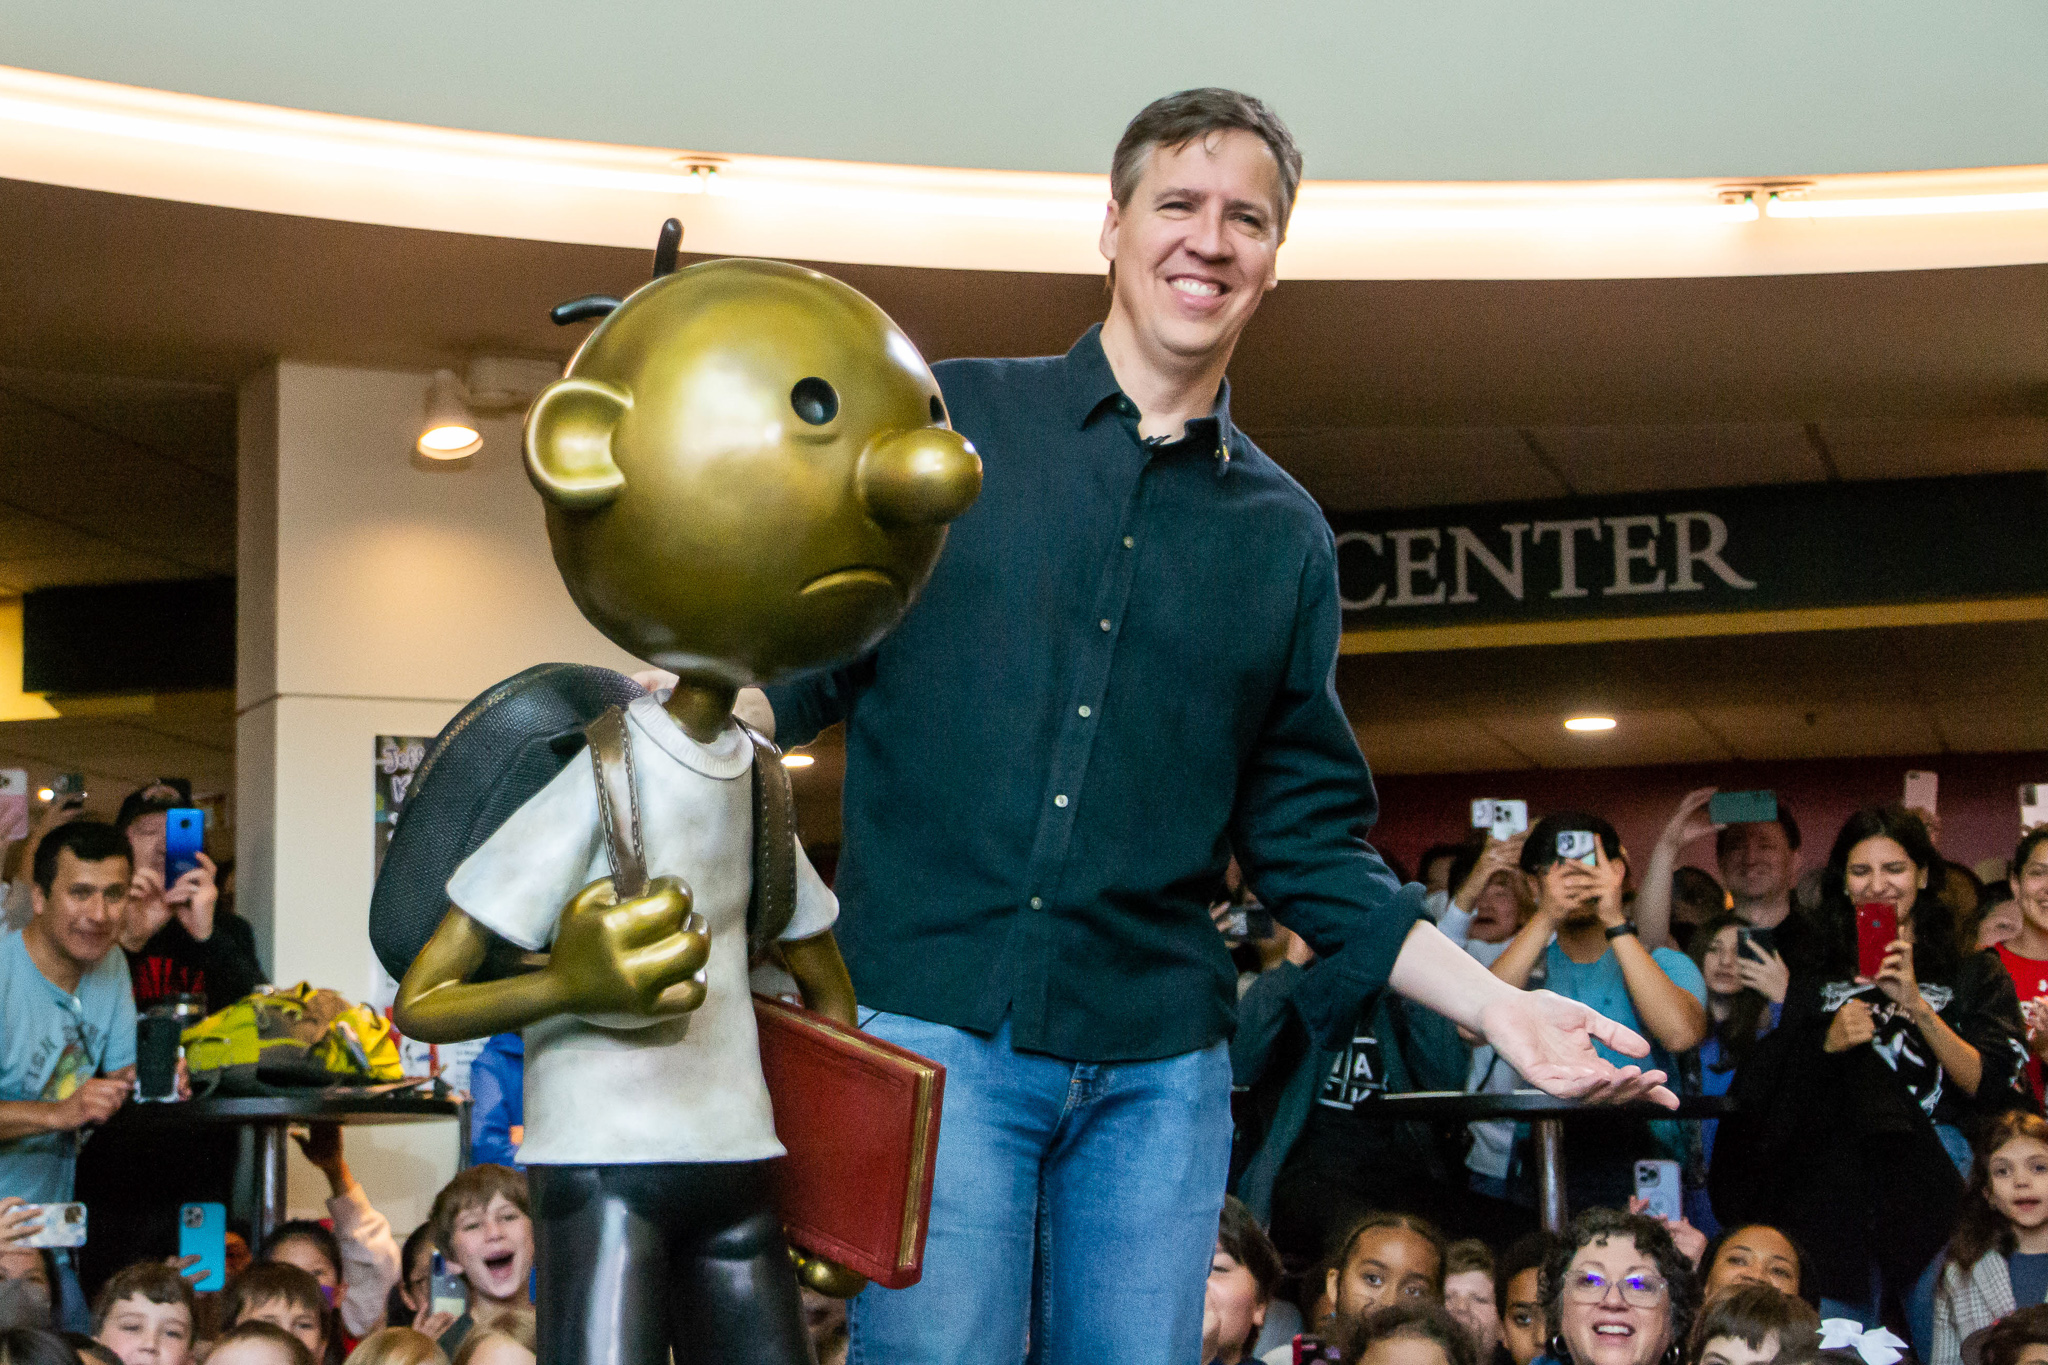 Maryland Day crowd shares excitement as Jeff Kinney unveils Greg